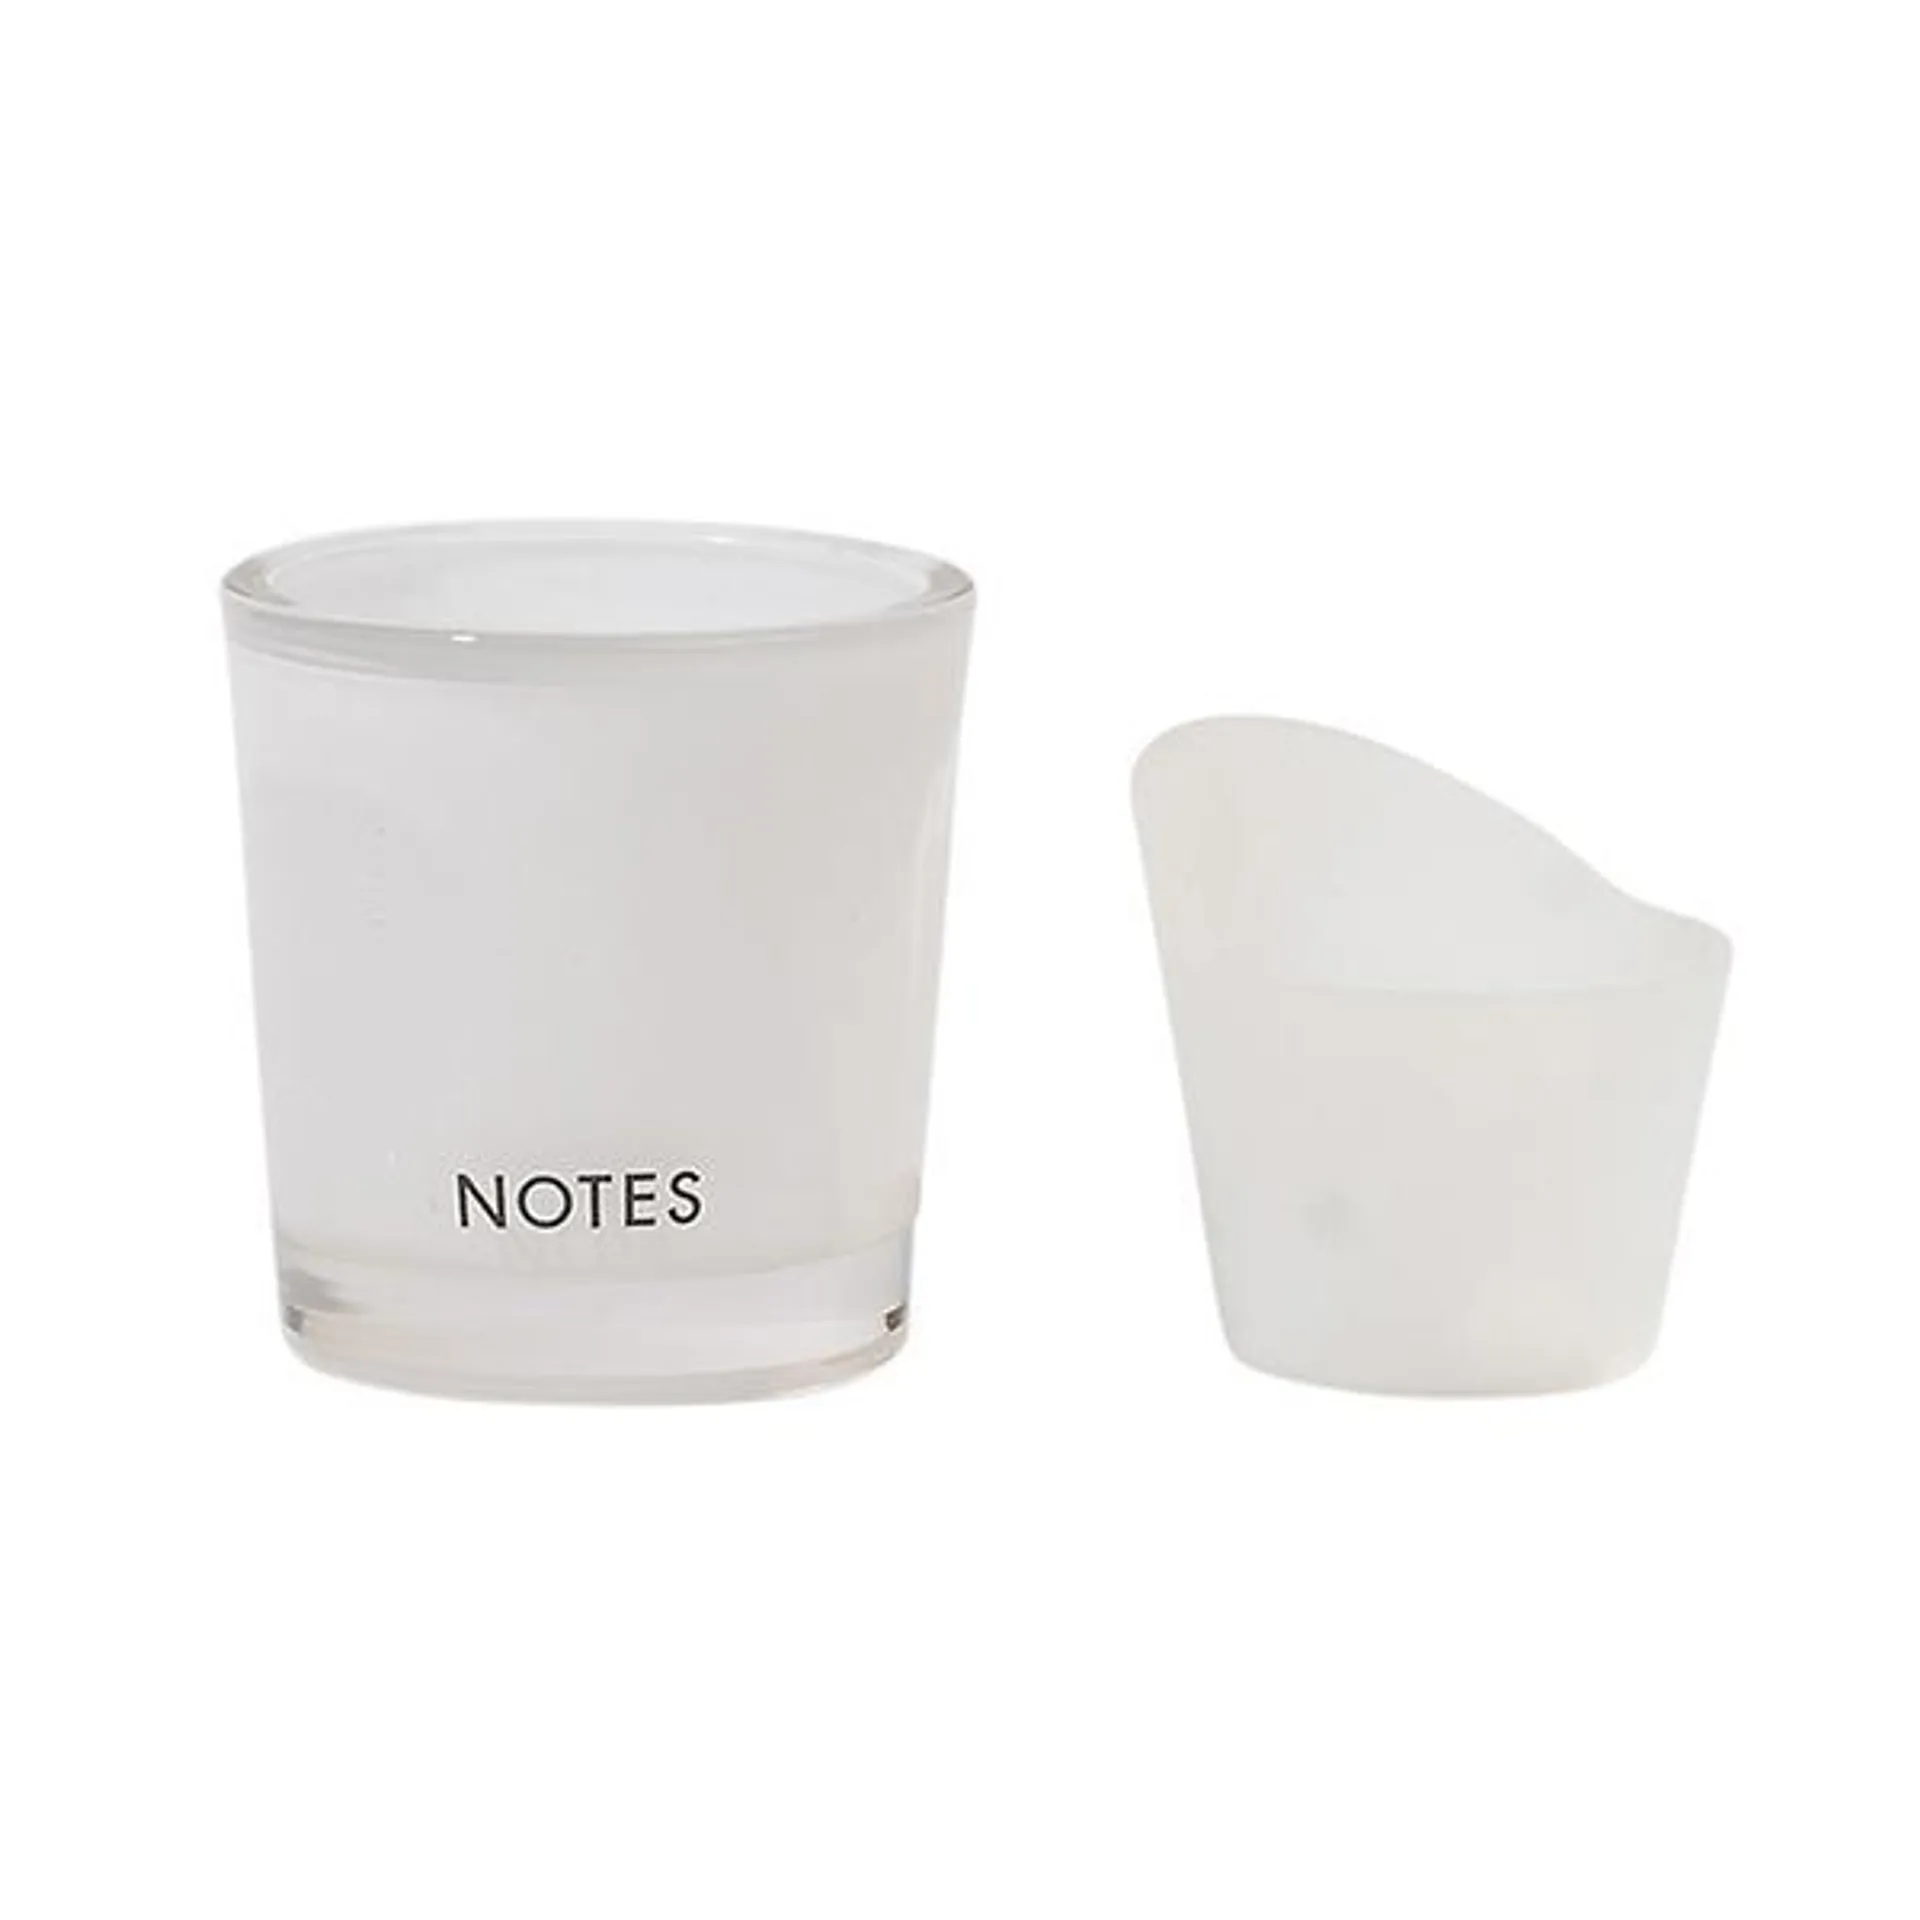 NOTES Starter Candle